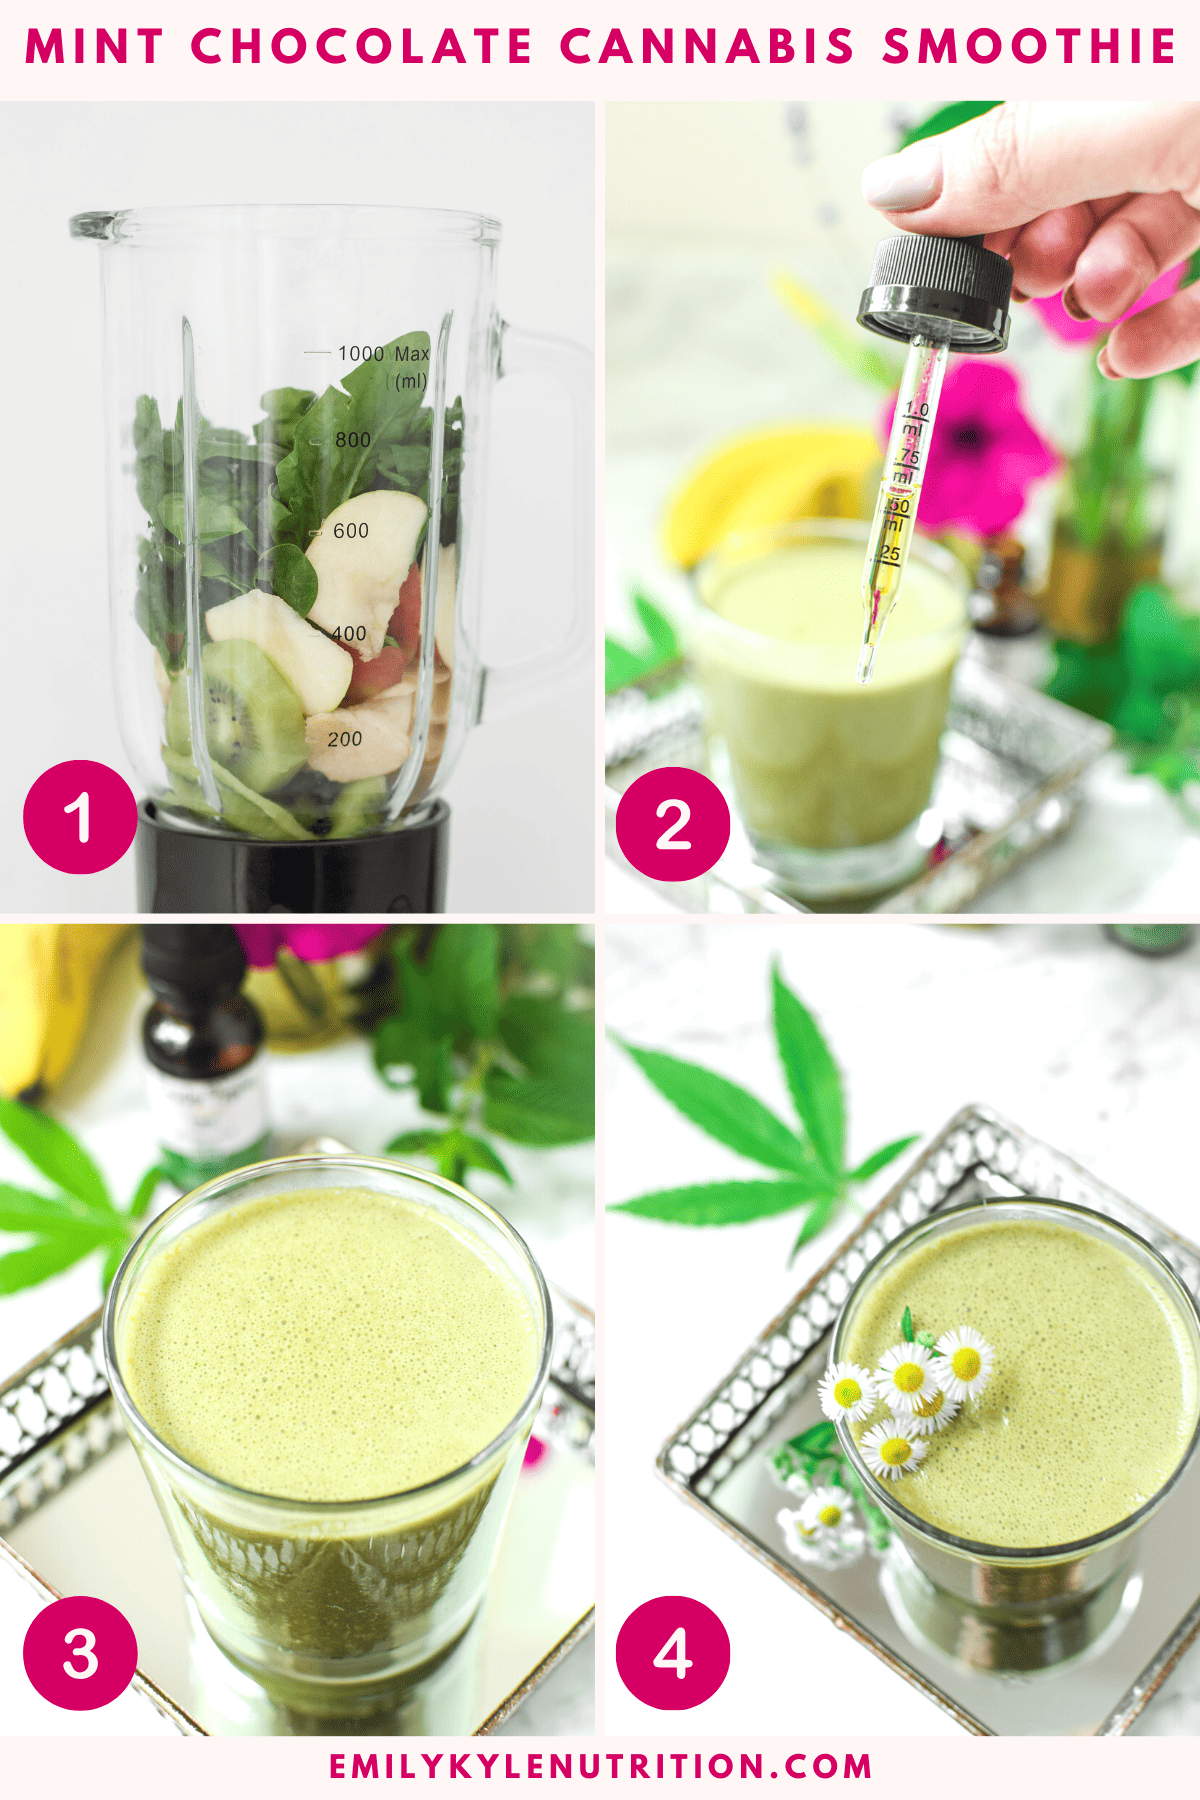 A four step image collage showing how to make a mint chocolate cannabis smoothie.